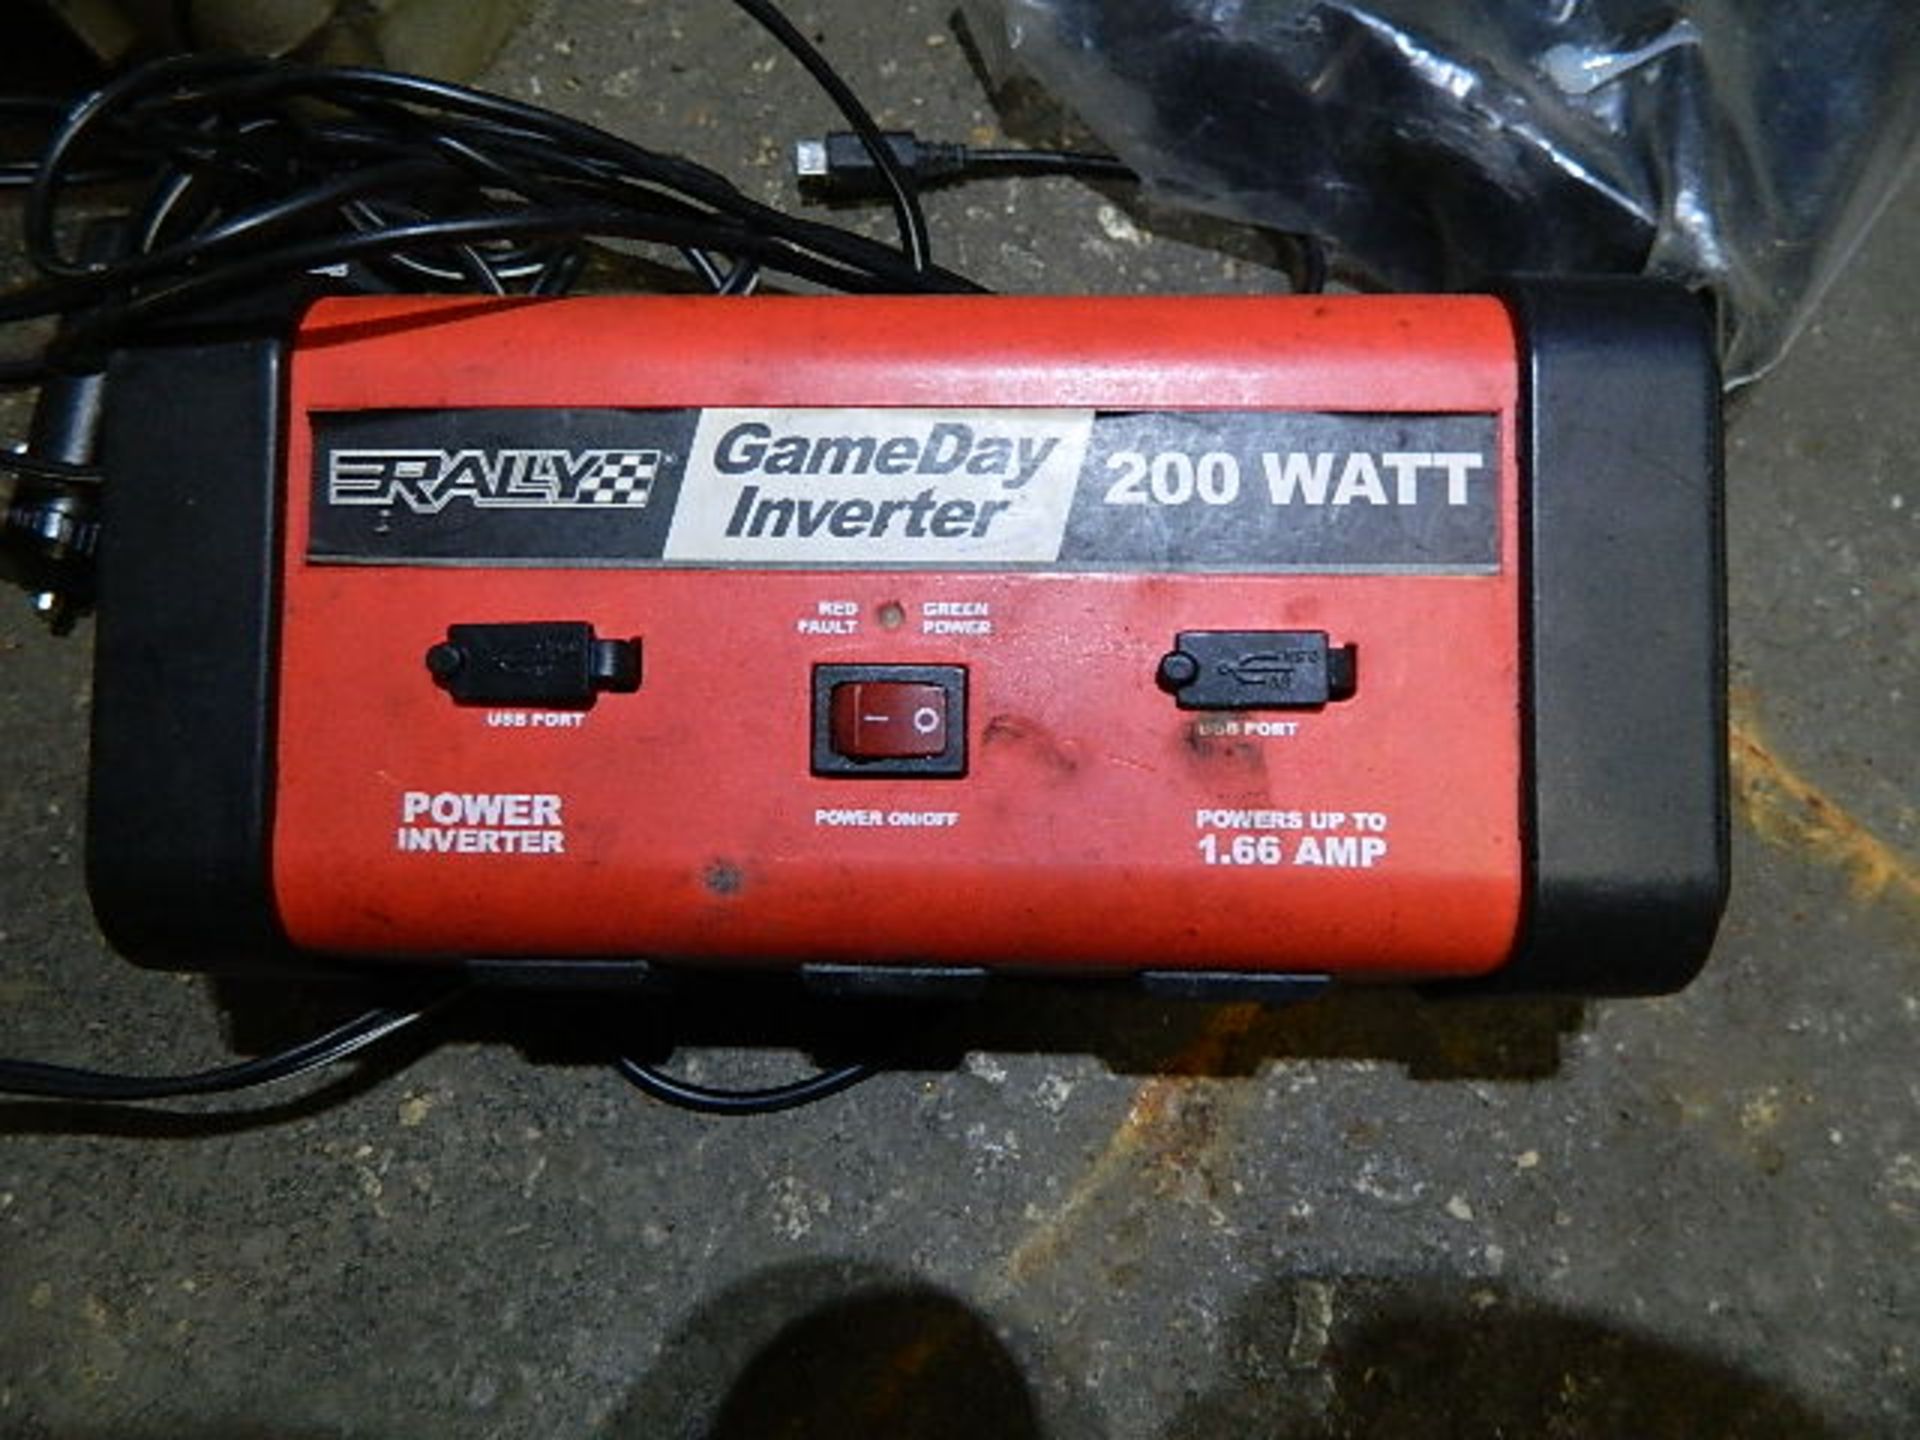 Tools. Lot Of 2 Come Alongs, Ryobi Sawsall 115 V., Rally 200 Watt Inverter, Misc. Electronic In Tub - Image 4 of 4